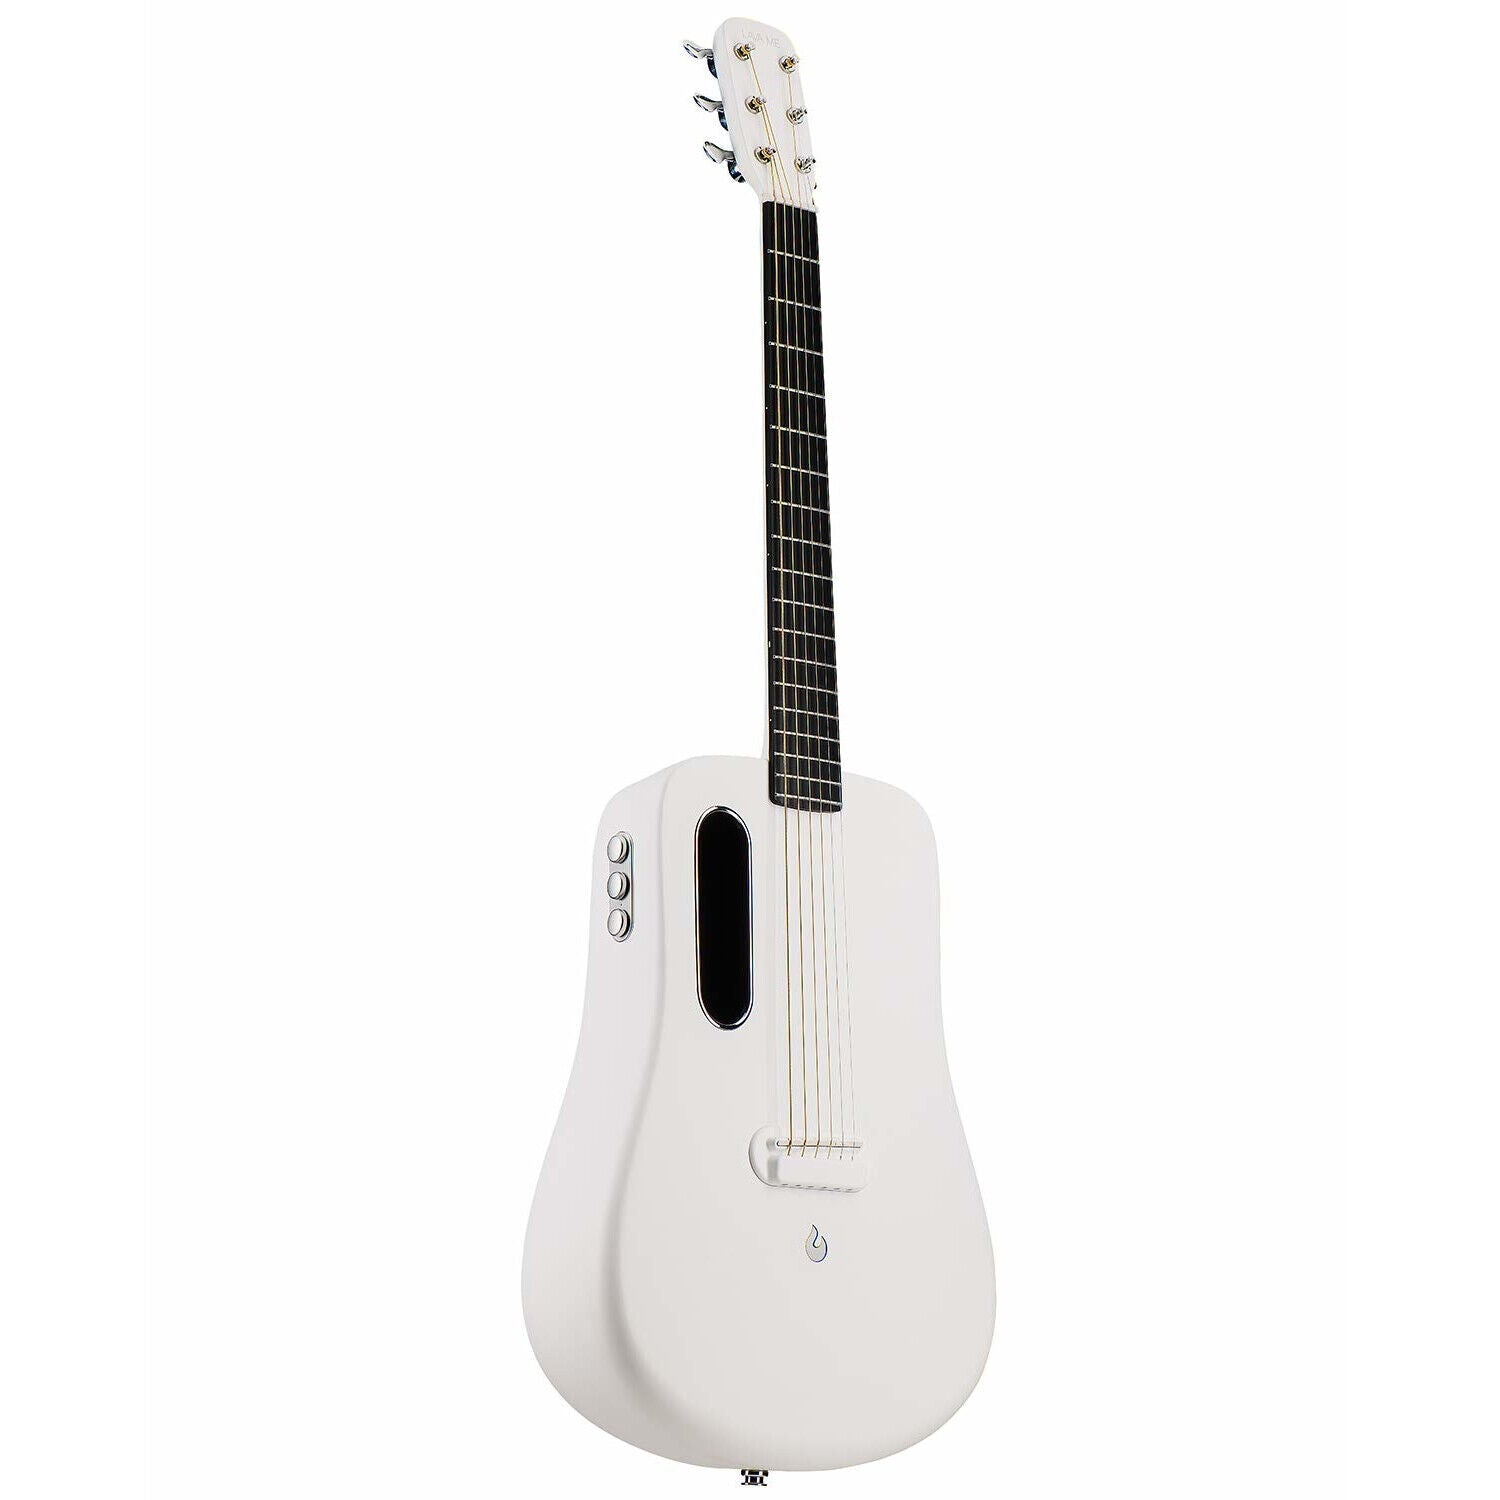 LAVA ME 2 FREEBOOST WHITE, Acoustic Guitar for sale at Richards Guitars.